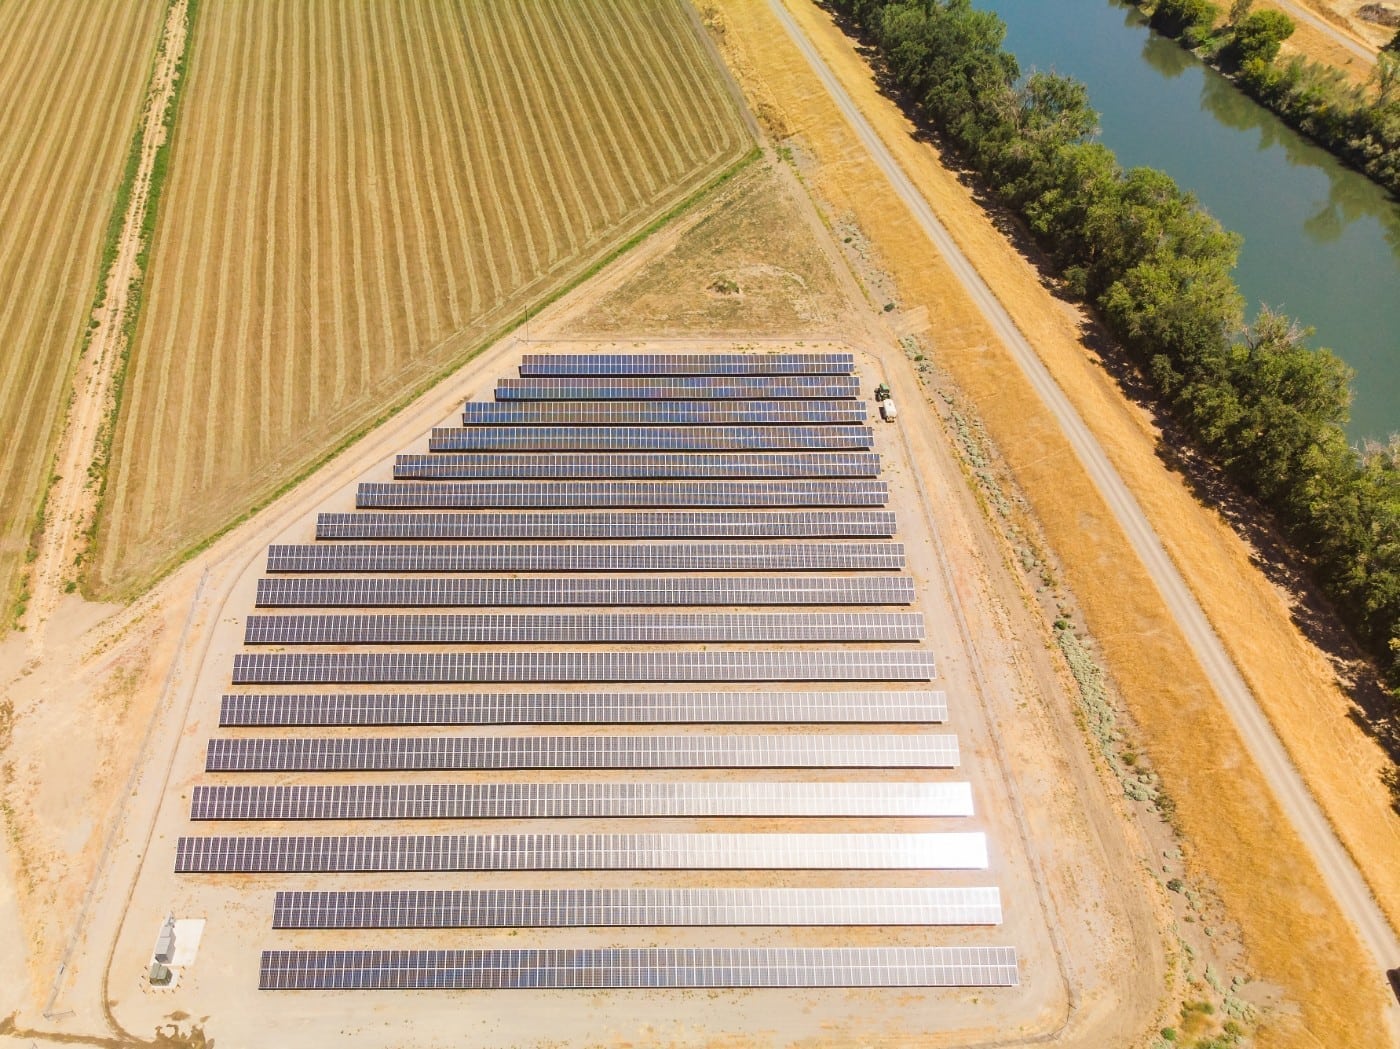 Aerial view of the solar farm constructed at Sycamore Mutual Water Company with a river on the right and cut grass fields on the left.